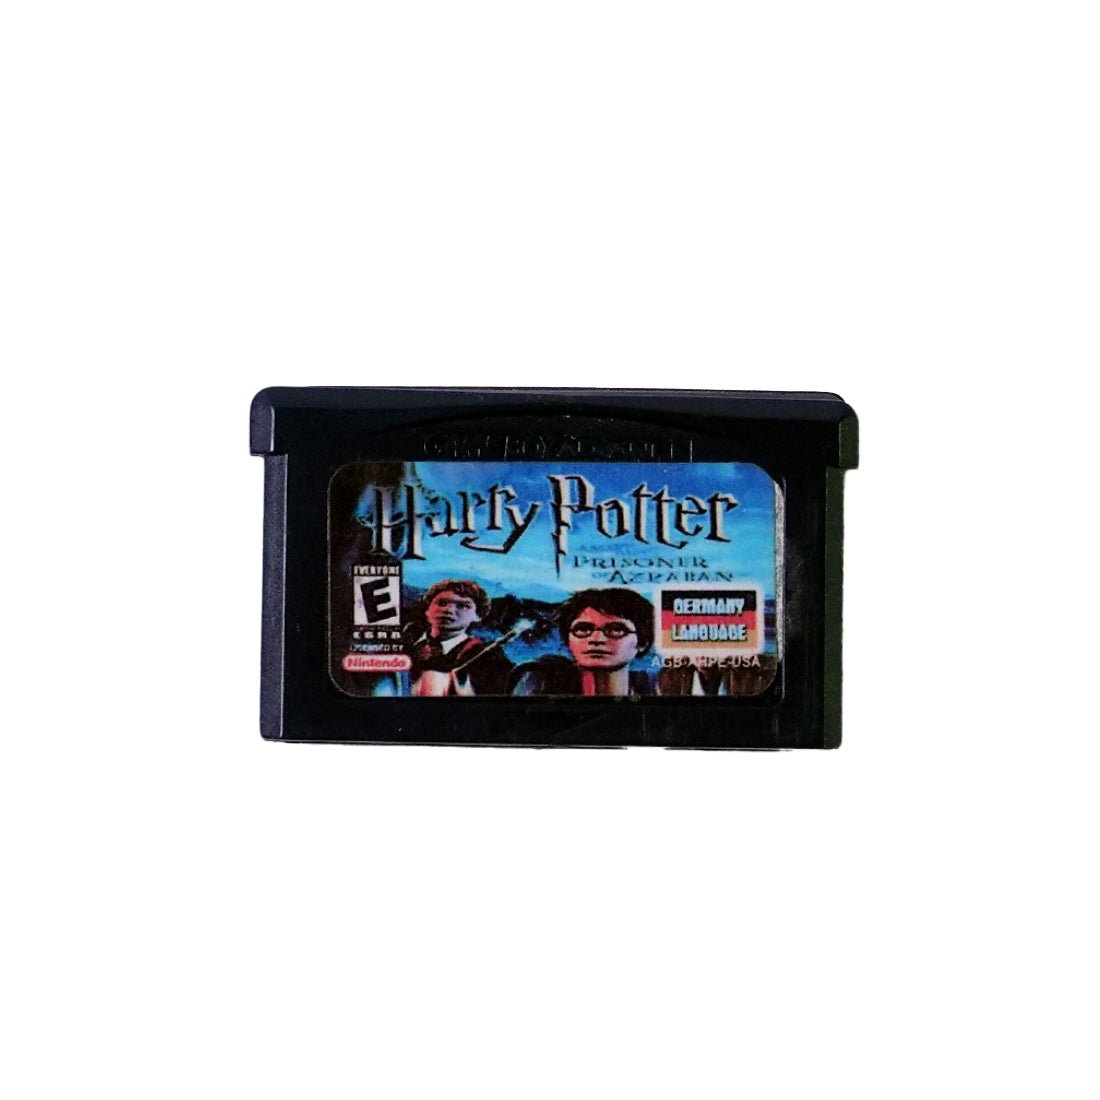 (Pre-Owned) Harry Potter and the Prisoner of Azkaban Game - Gameboy Advance - ريترو - Store 974 | ستور ٩٧٤